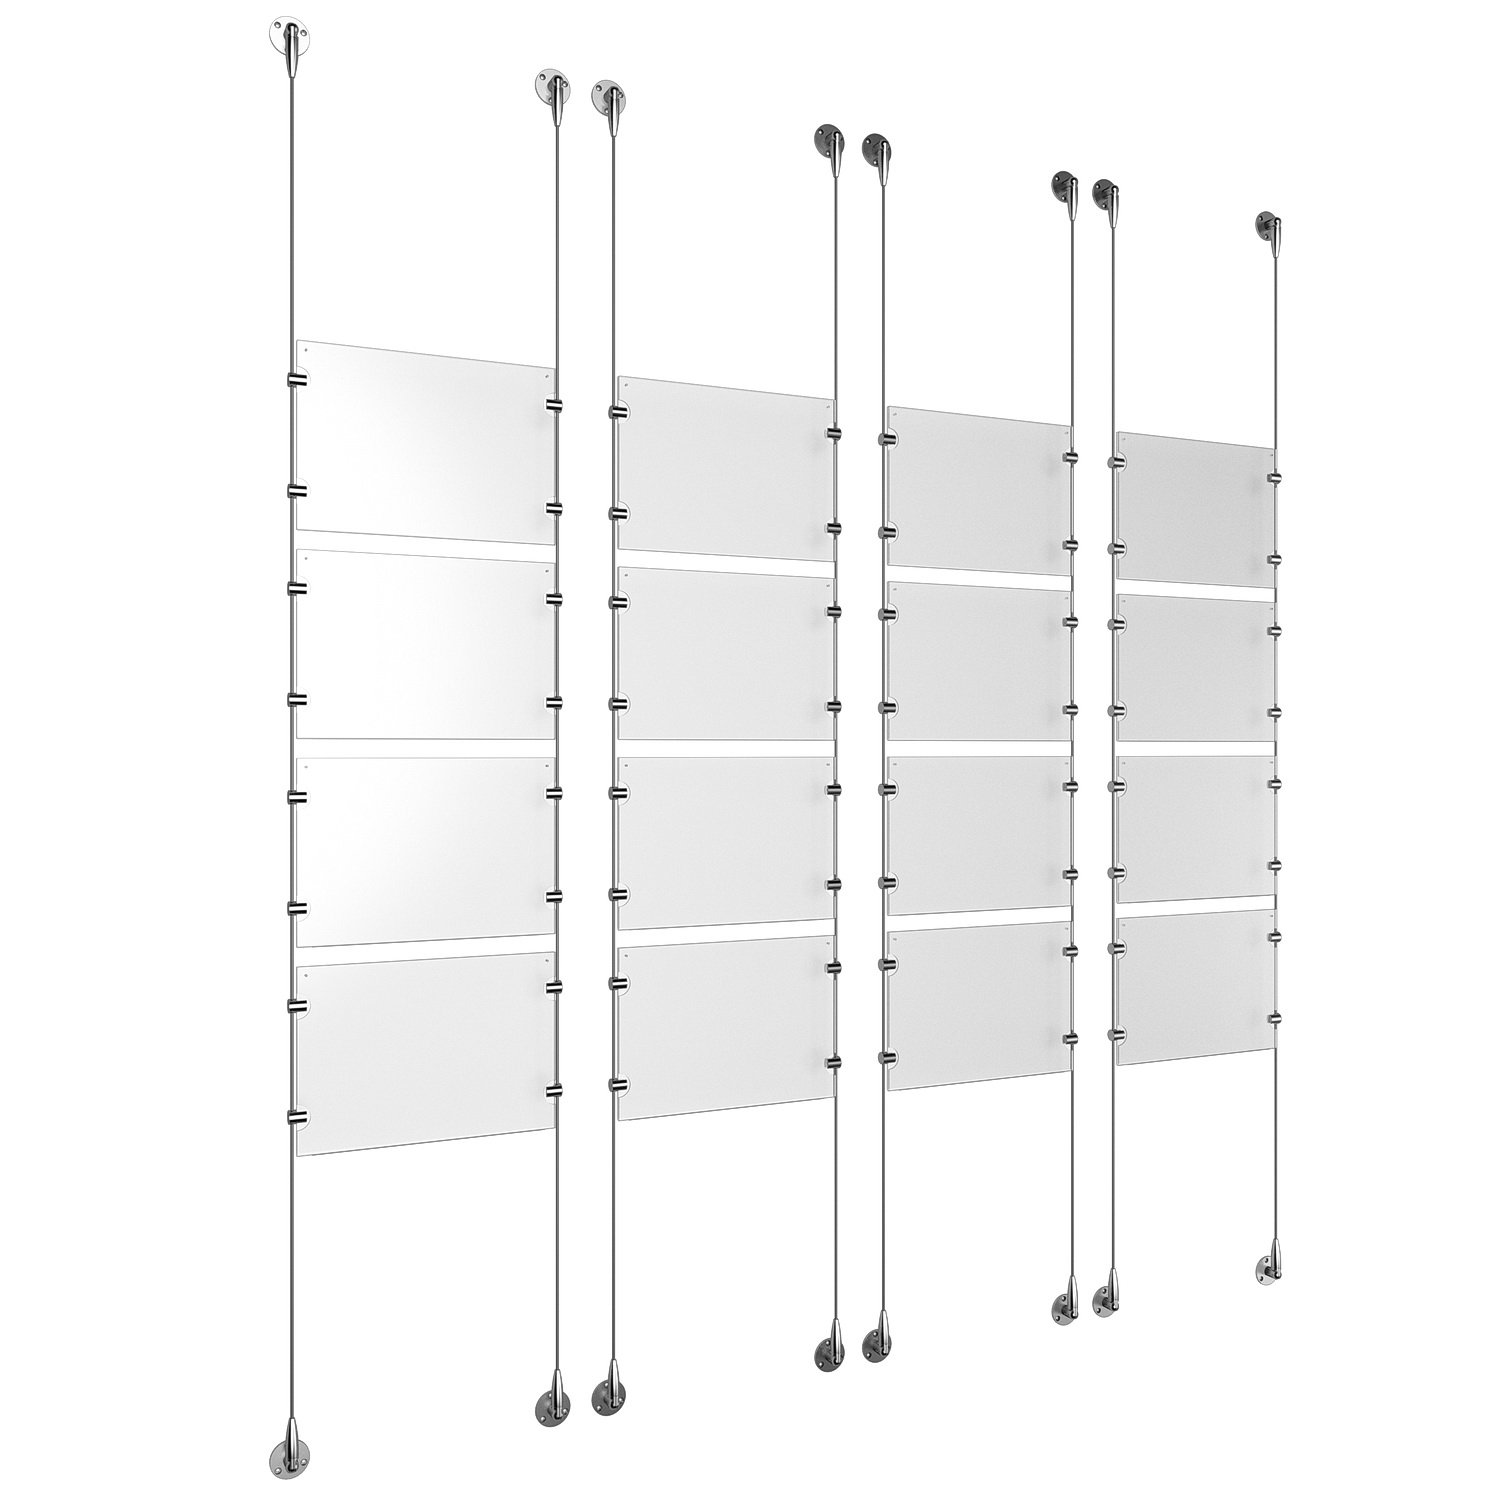 (16) 11'' Width x 8-1/2'' Height Clear Acrylic Frame & (8) Aluminum Clear Anodized Adjustable Angle Signature 1/8'' Diameter Cable Systems with (64) Single-Sided Panel Grippers